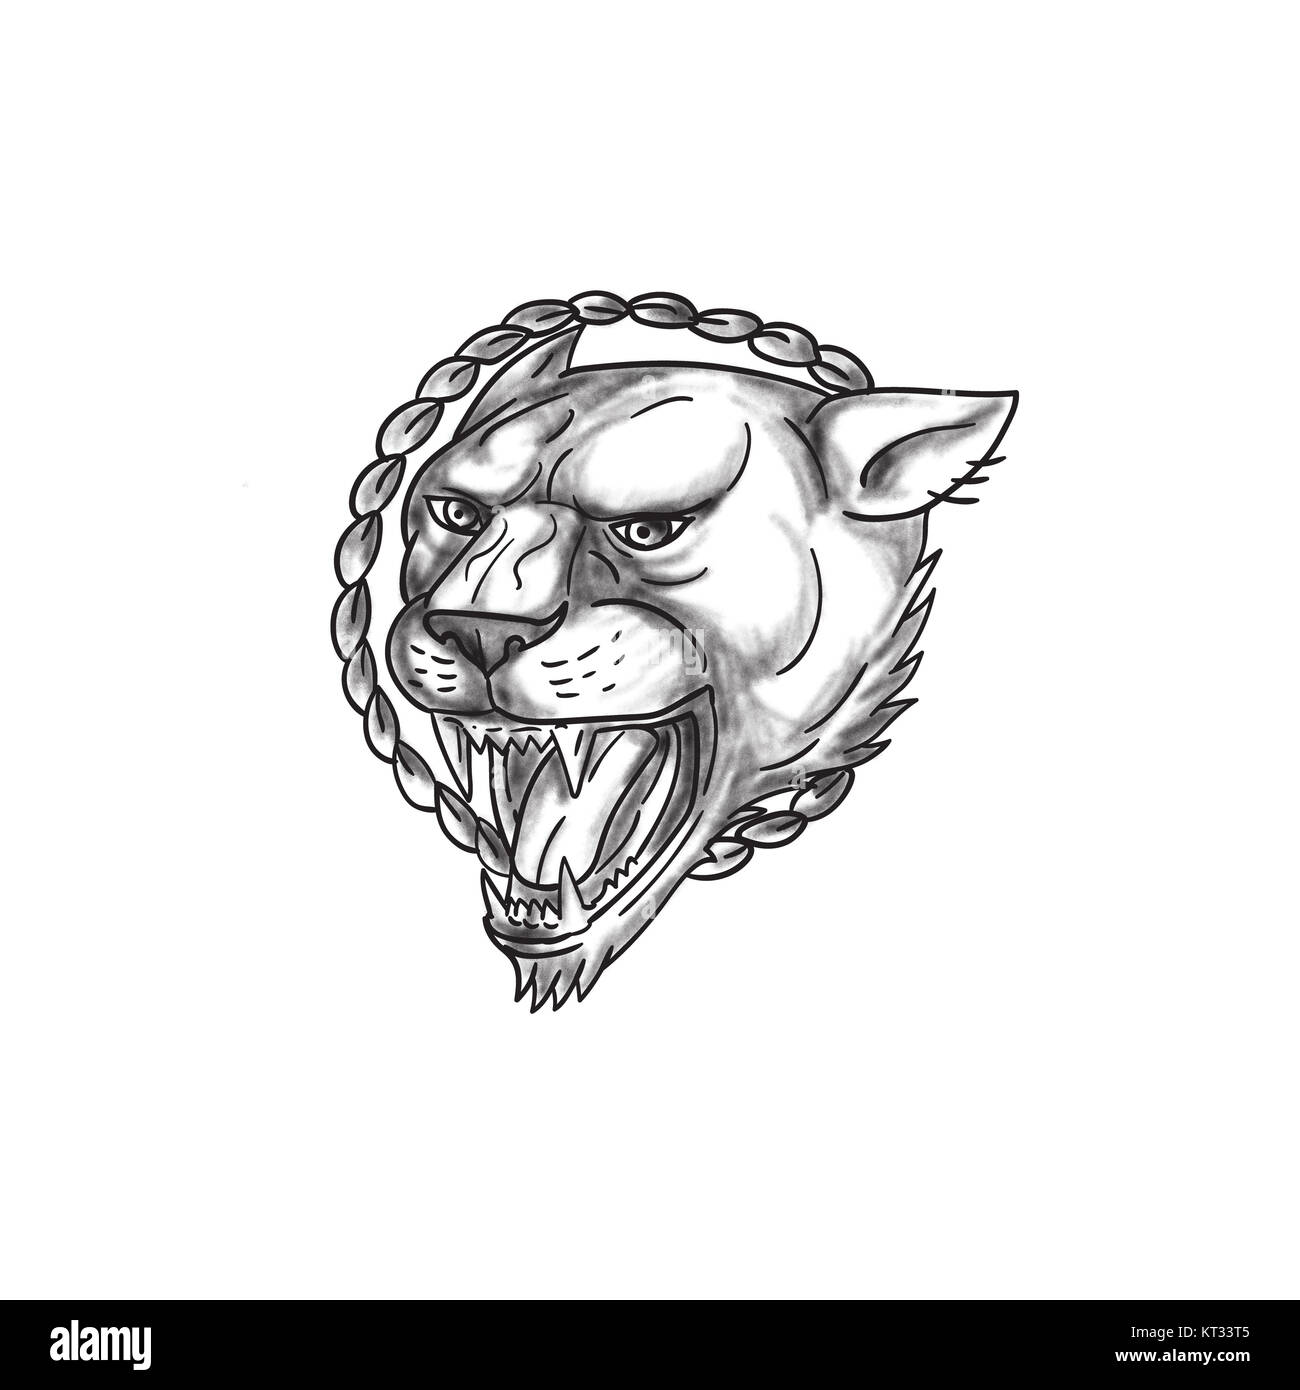 Lioness Growling Rope Circle Tattoo Stock Photo